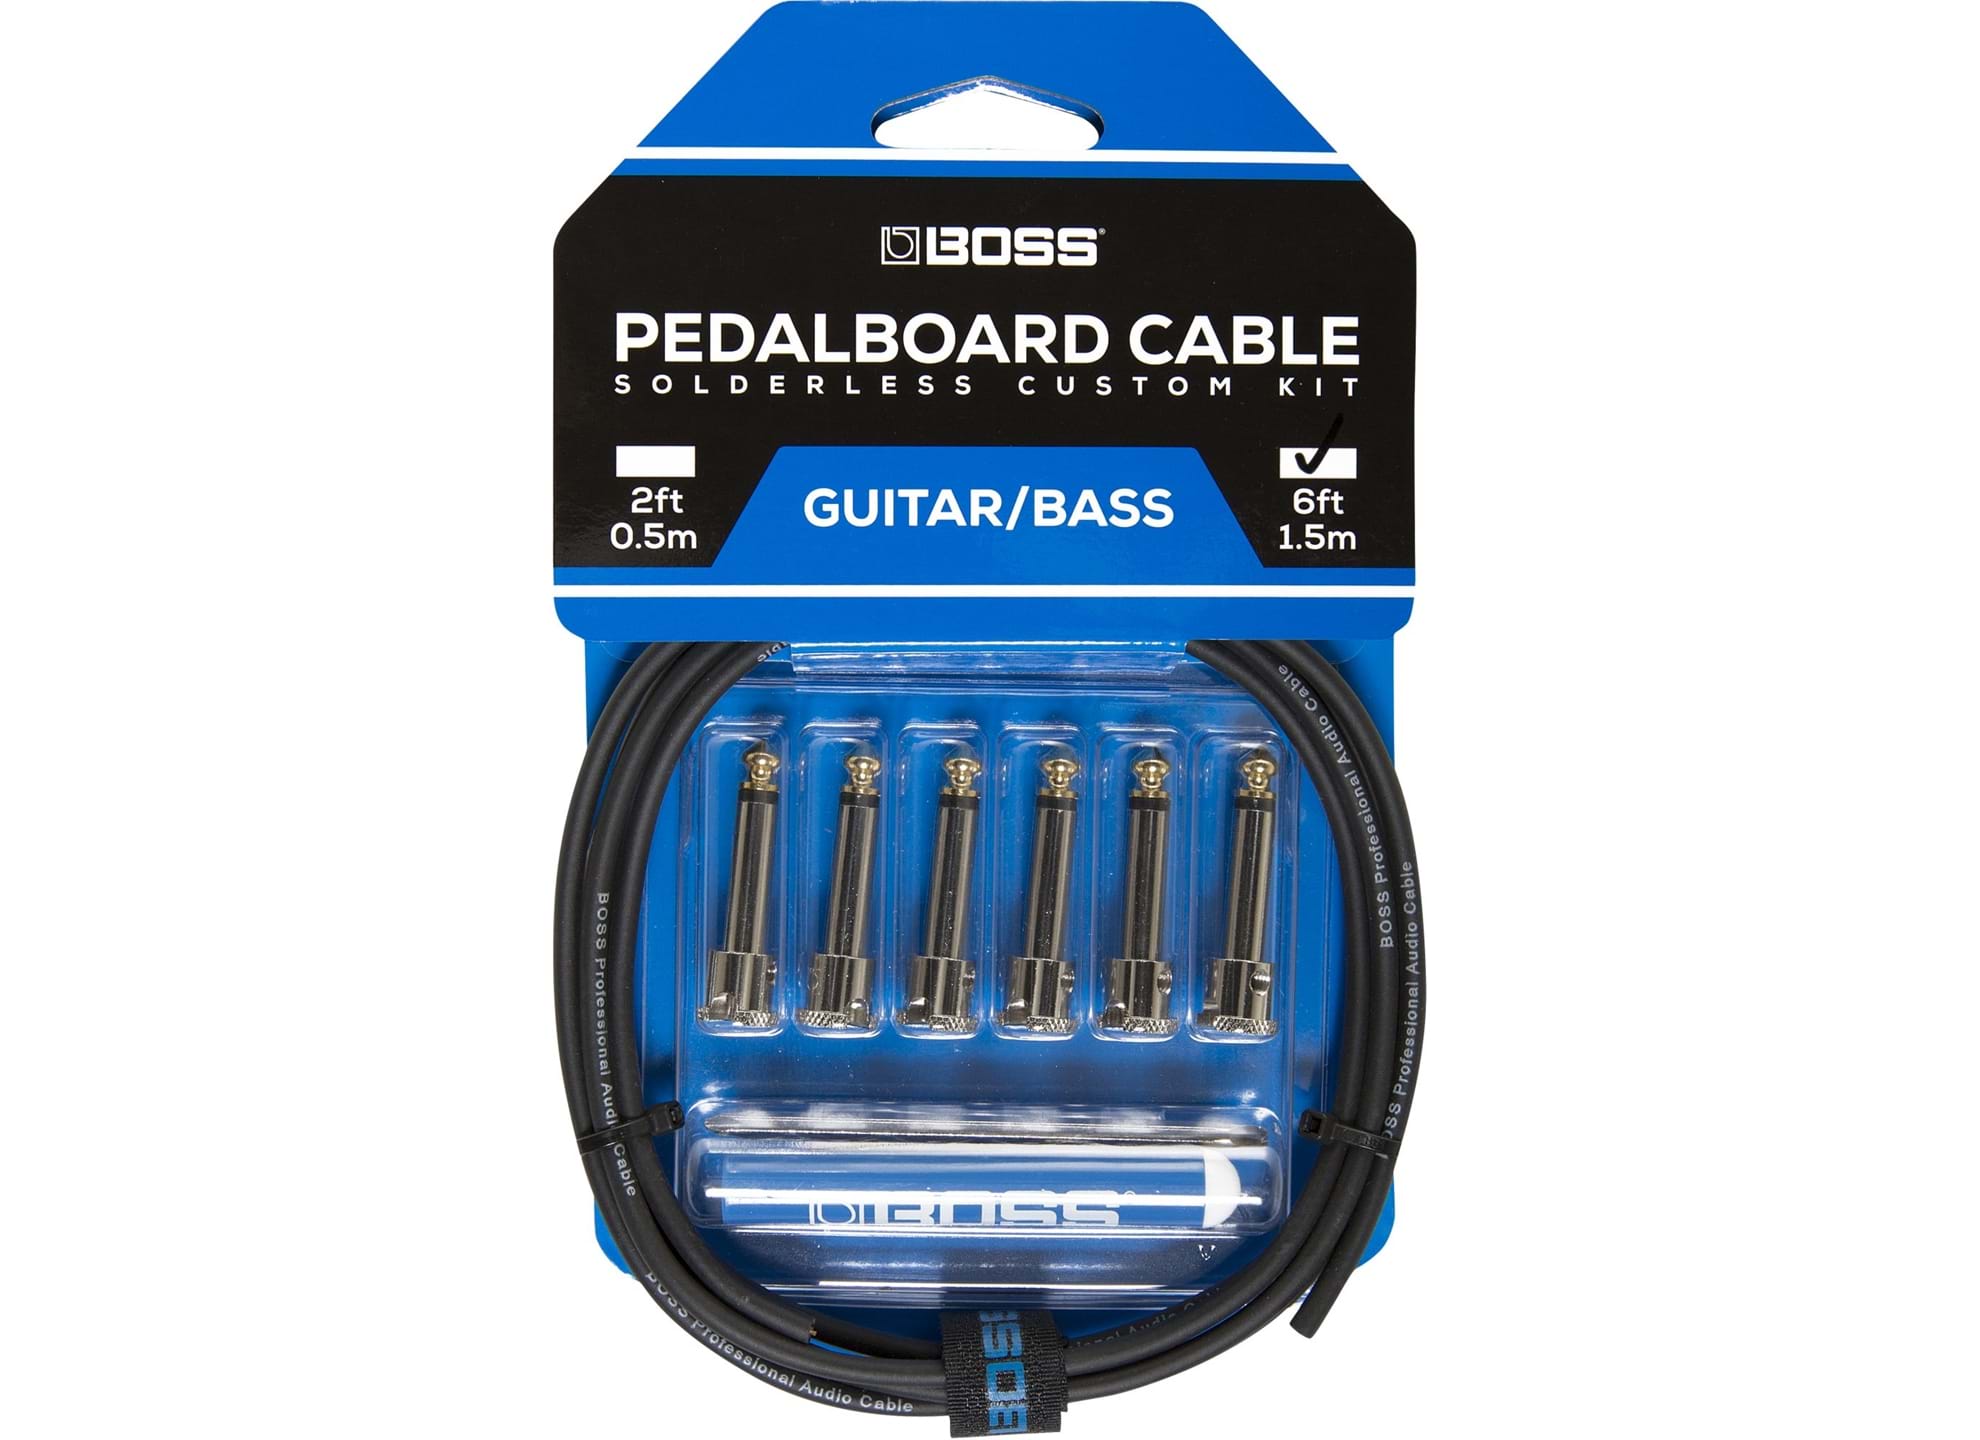 BCK-6 Pedalboard Cable Kit 1.8m